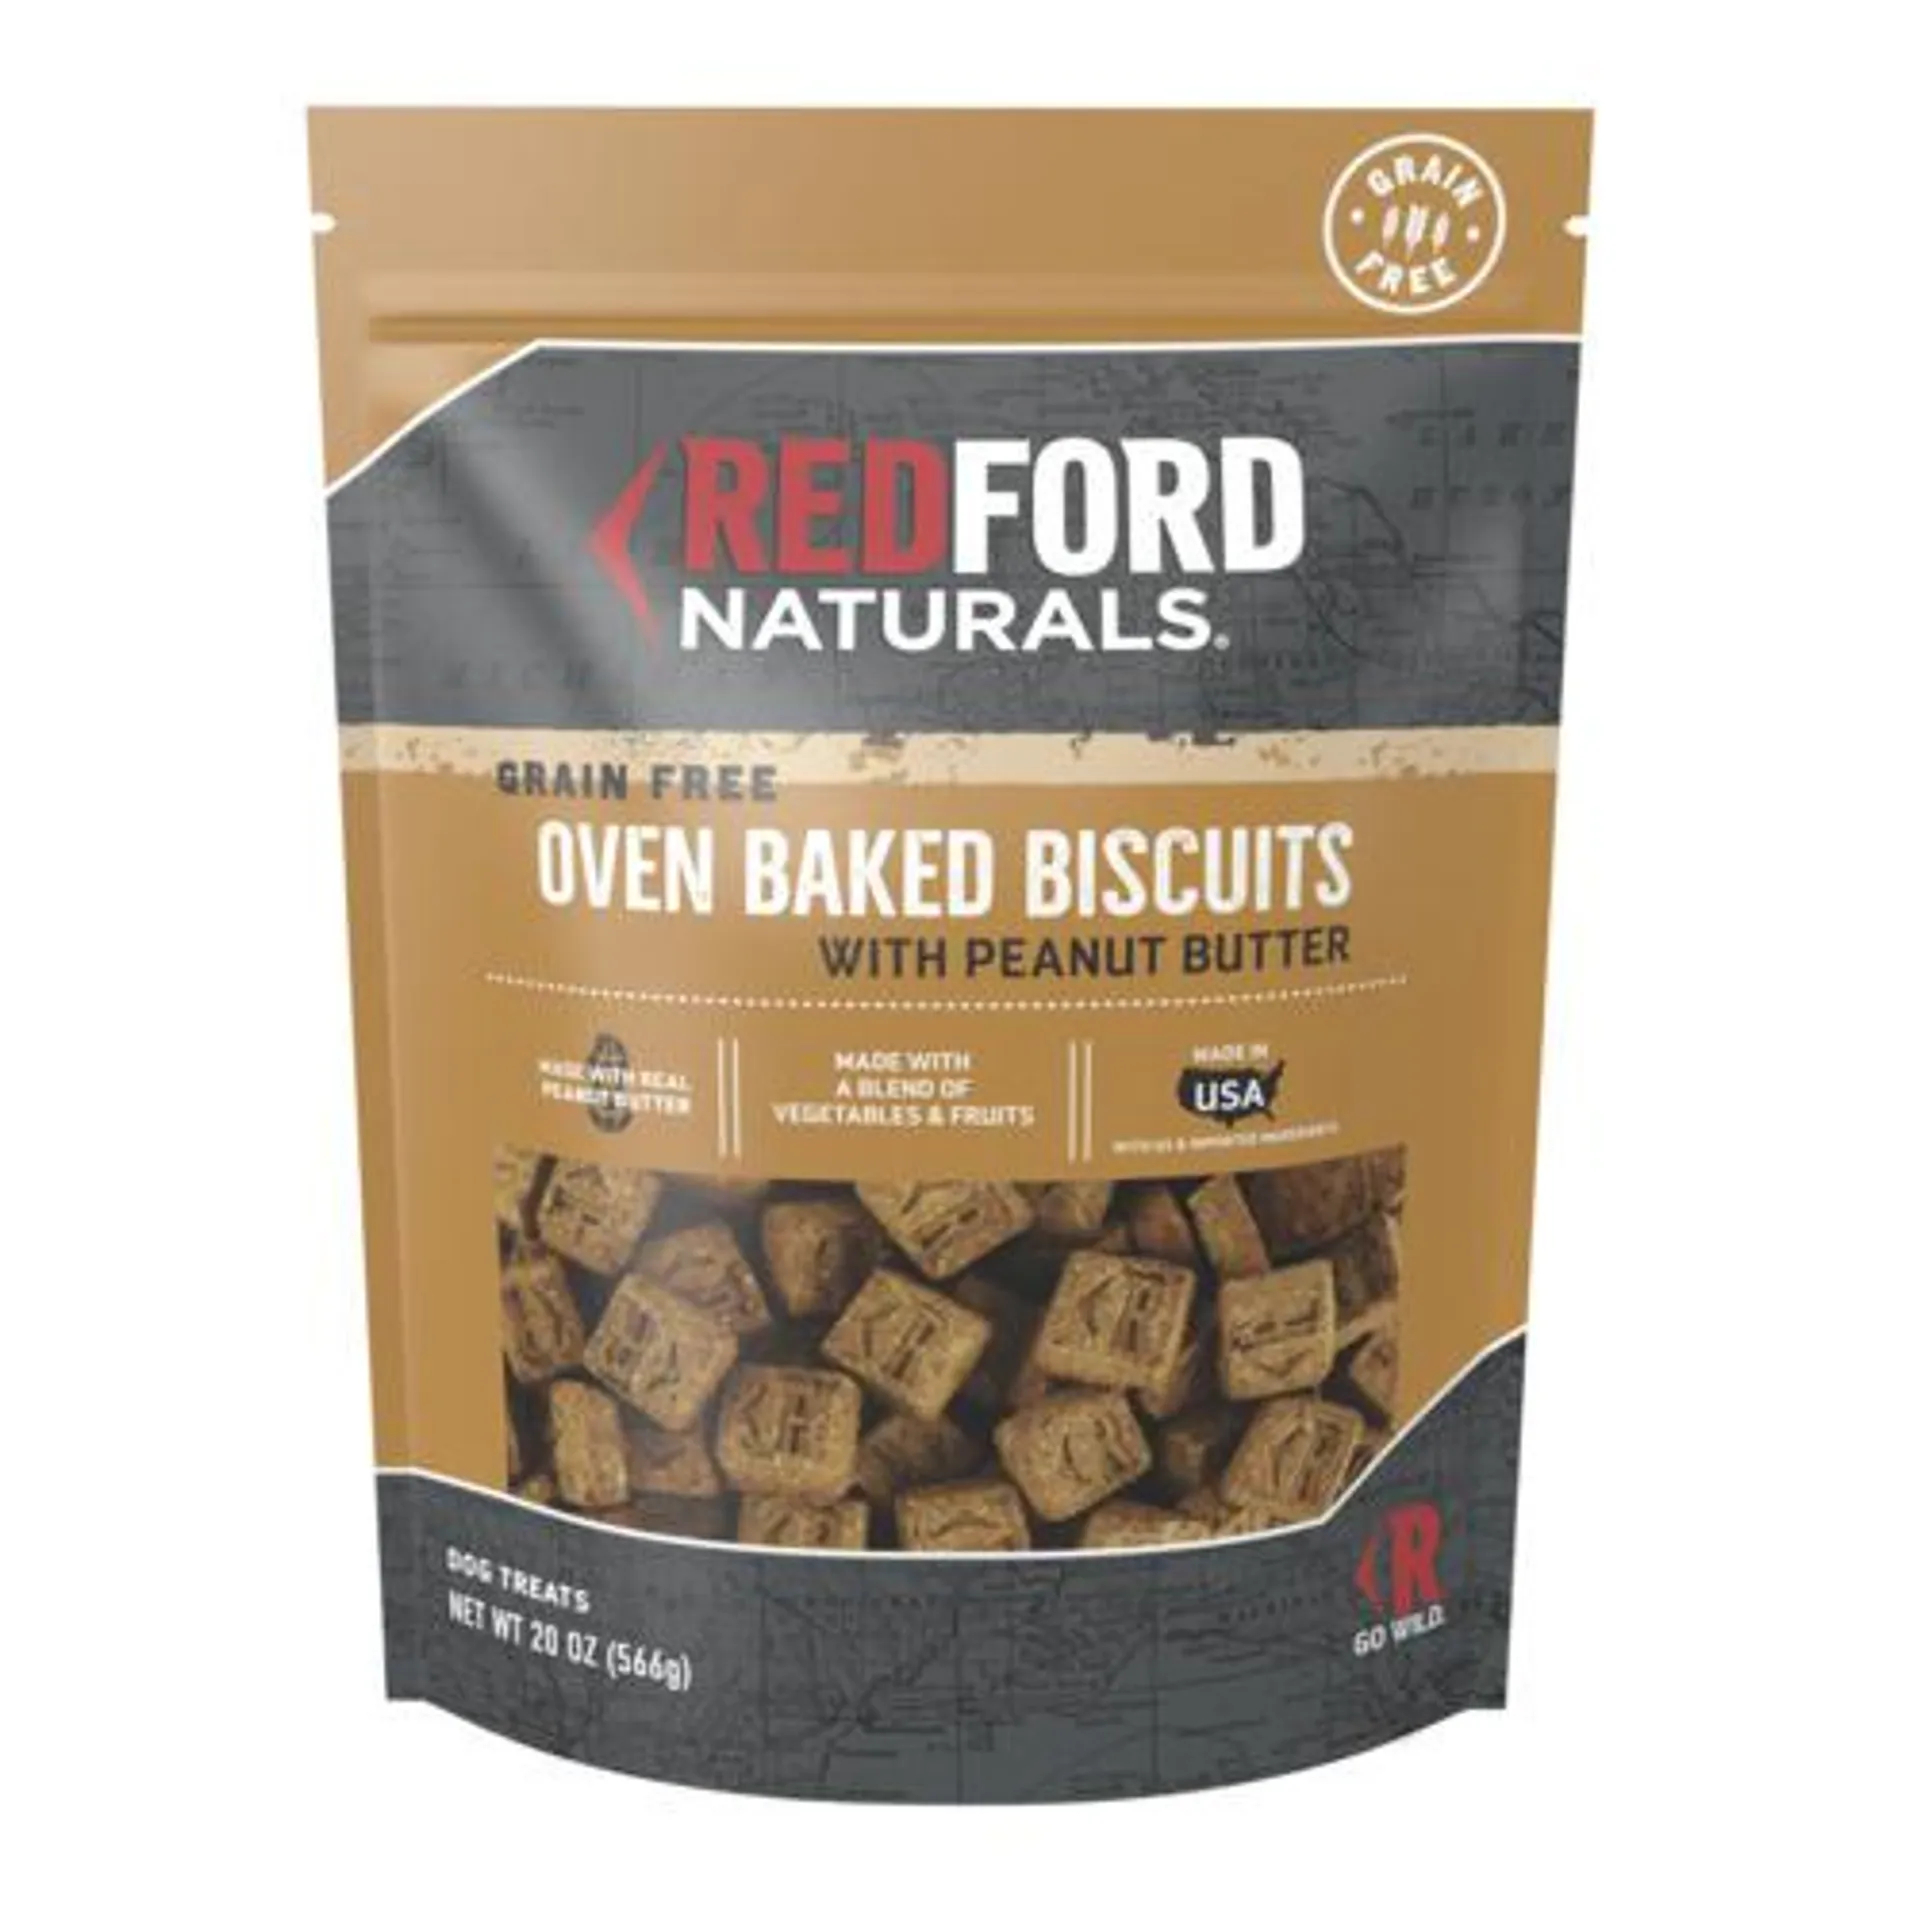 Redford Naturals Grain Free Biscuits Dog Treat, Peanut Butter, 20 Ounces